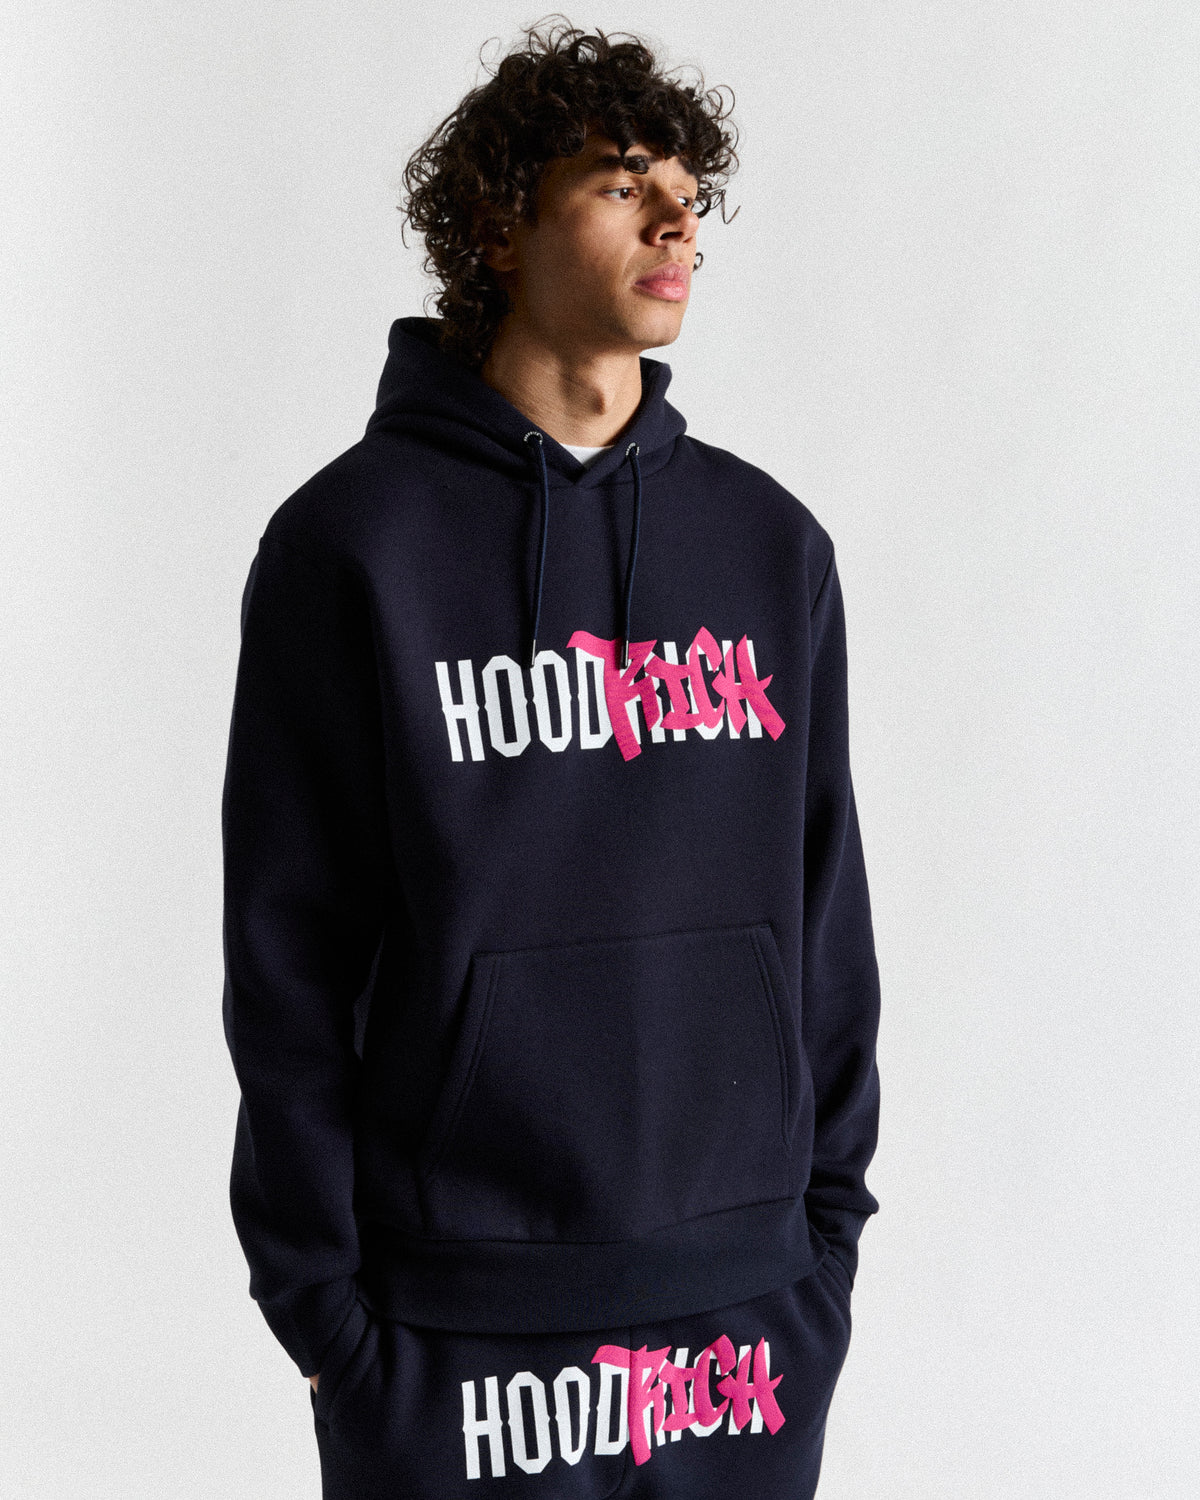 Hoodrich Official Store | From Nothing To Something